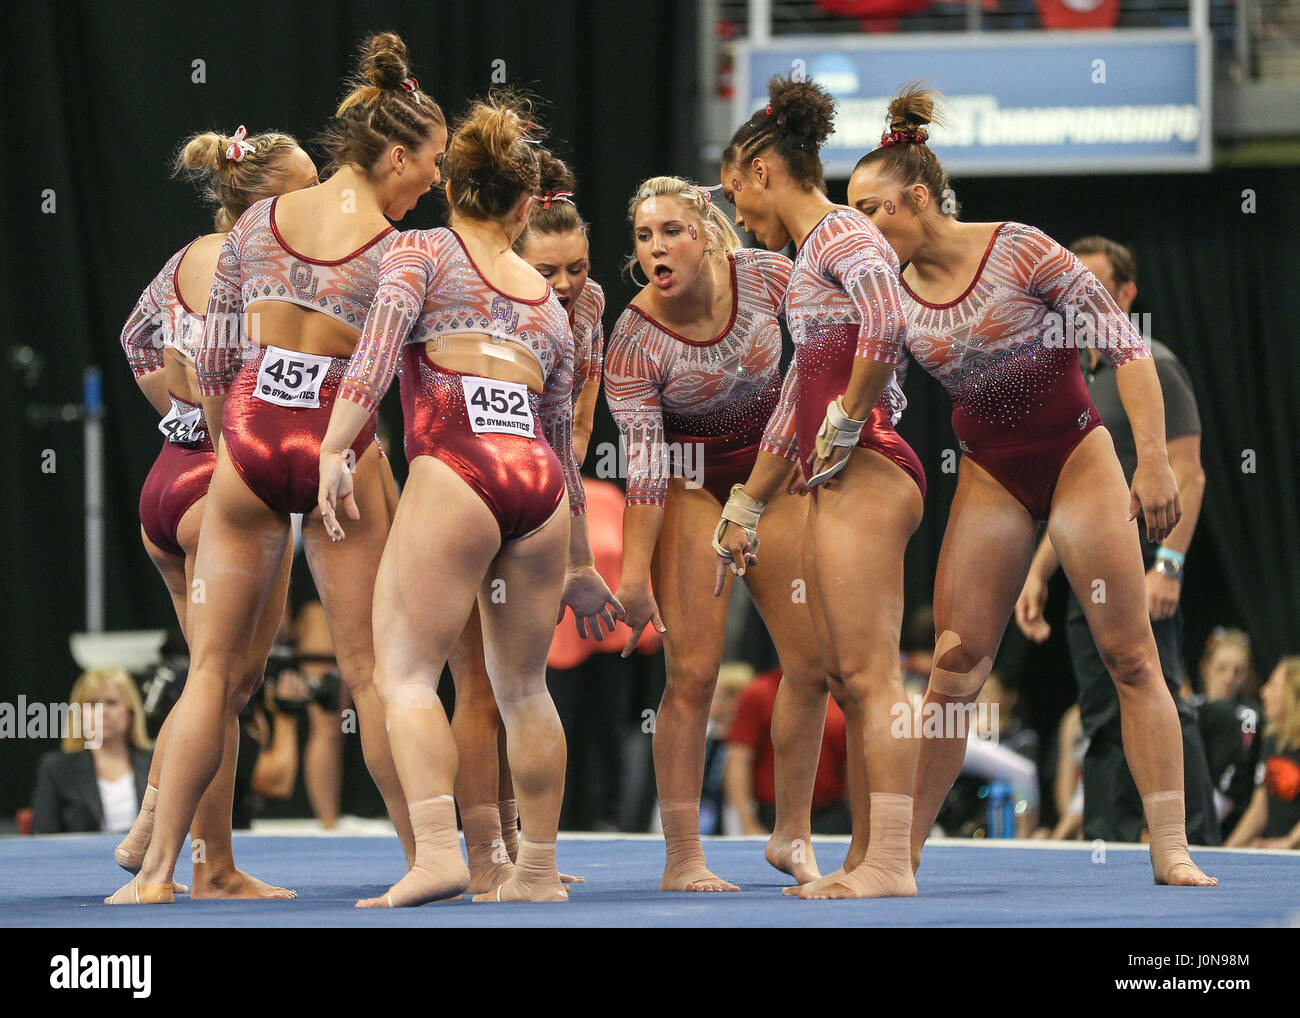 St. 14th Apr, 2017. The Oklahoma women's gymnastics team gathers on the floor prior to starting their floor rotation during the Semifinals of the 2017 NCAA Women's National Collegiate Gymnastics Championships at the Chaifetz Arena in St. Louis, MO. Kyle Okita/CSM/Alamy Live News Stock Photo